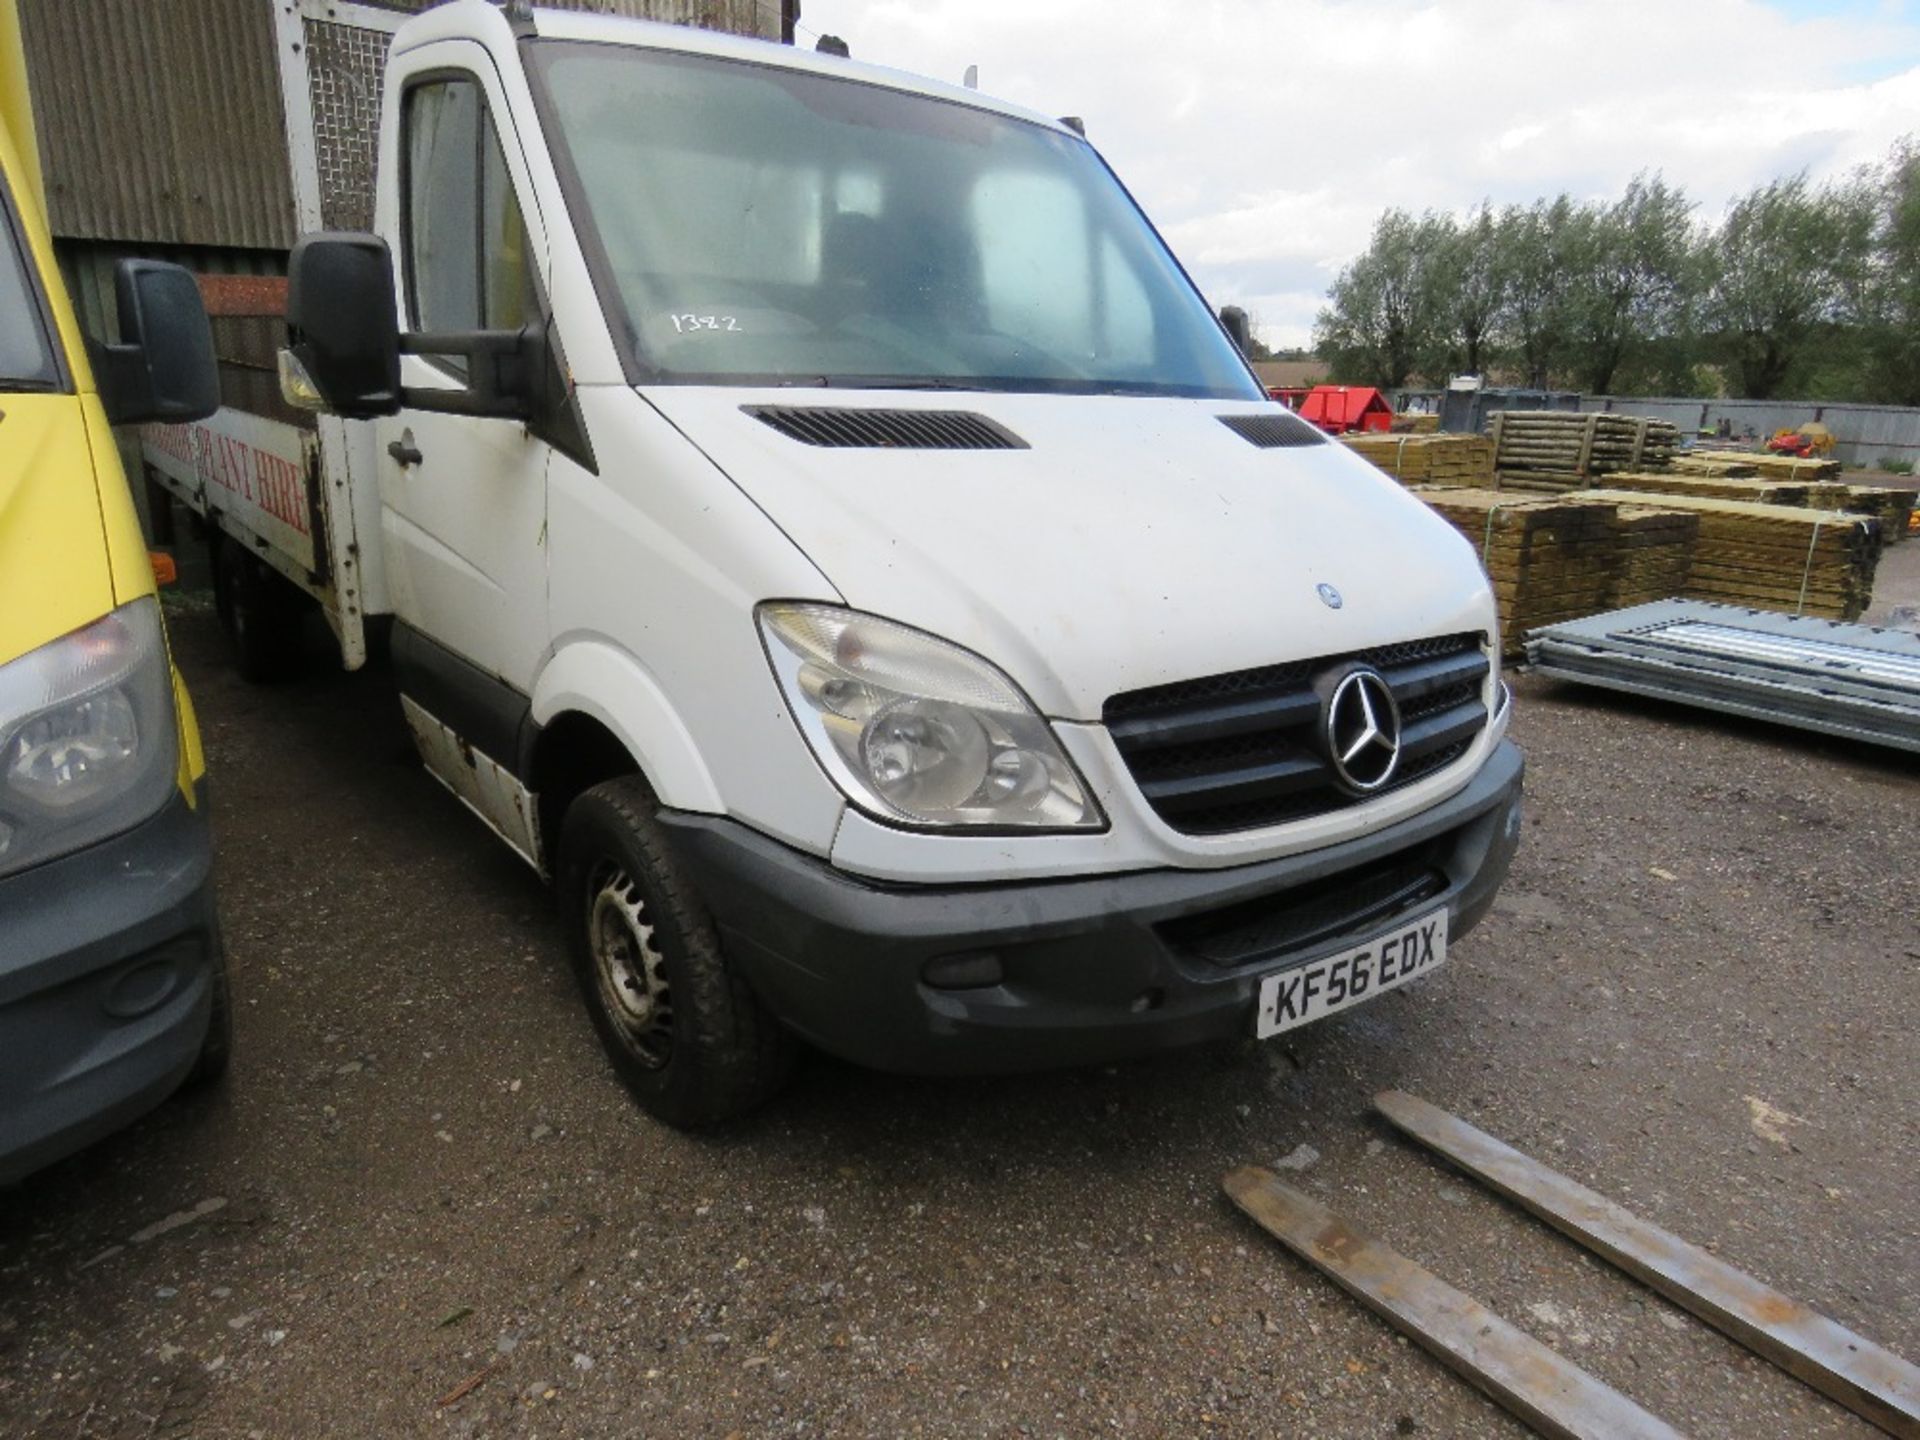 MERCEDES SPRINTER DROP SIDE TRUCK. REG:KF56EXY. TAIL LIFT. 14FT BODY APPROX. NON RUNN - Image 7 of 7